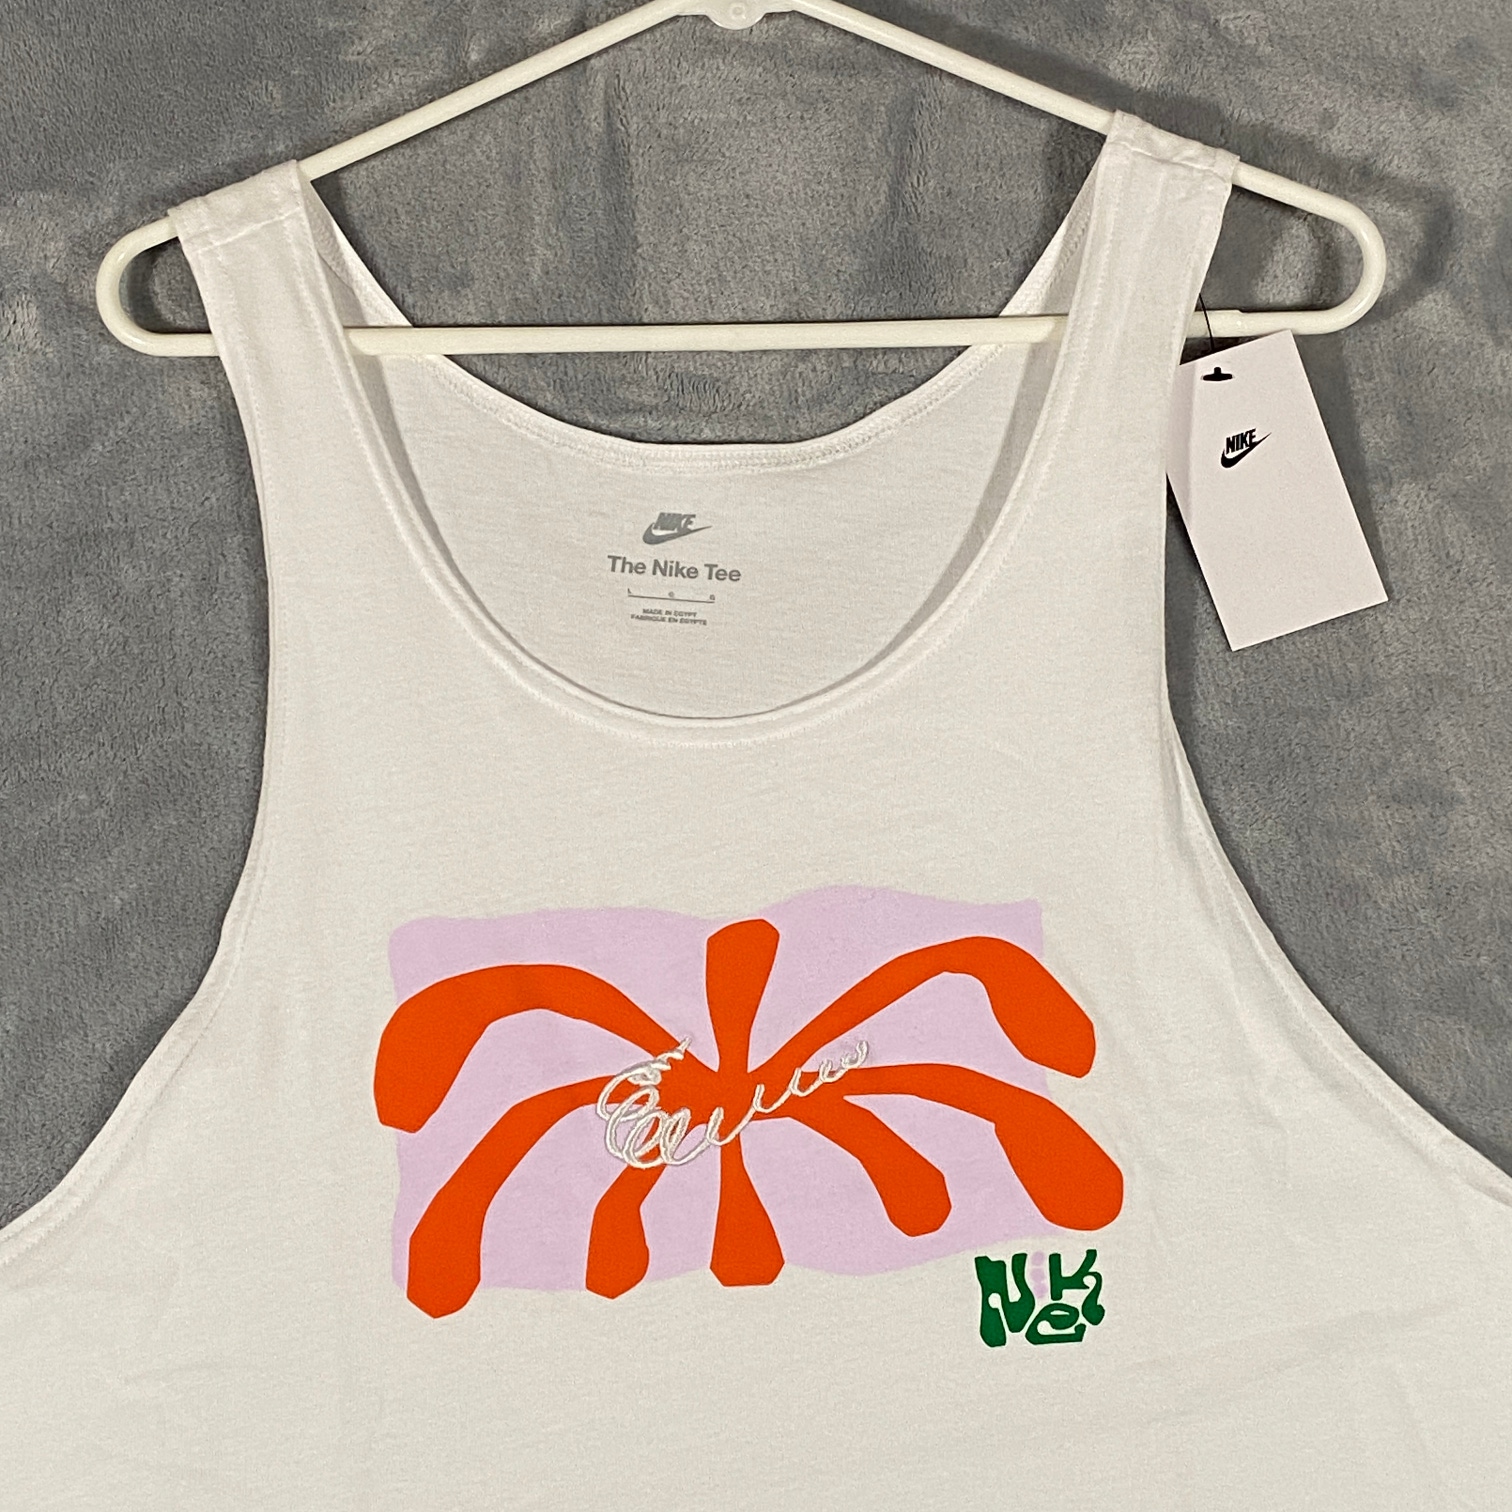 NIKE Sportswear Tank Top Mens Large White Spring Break Embroidered Colorful New